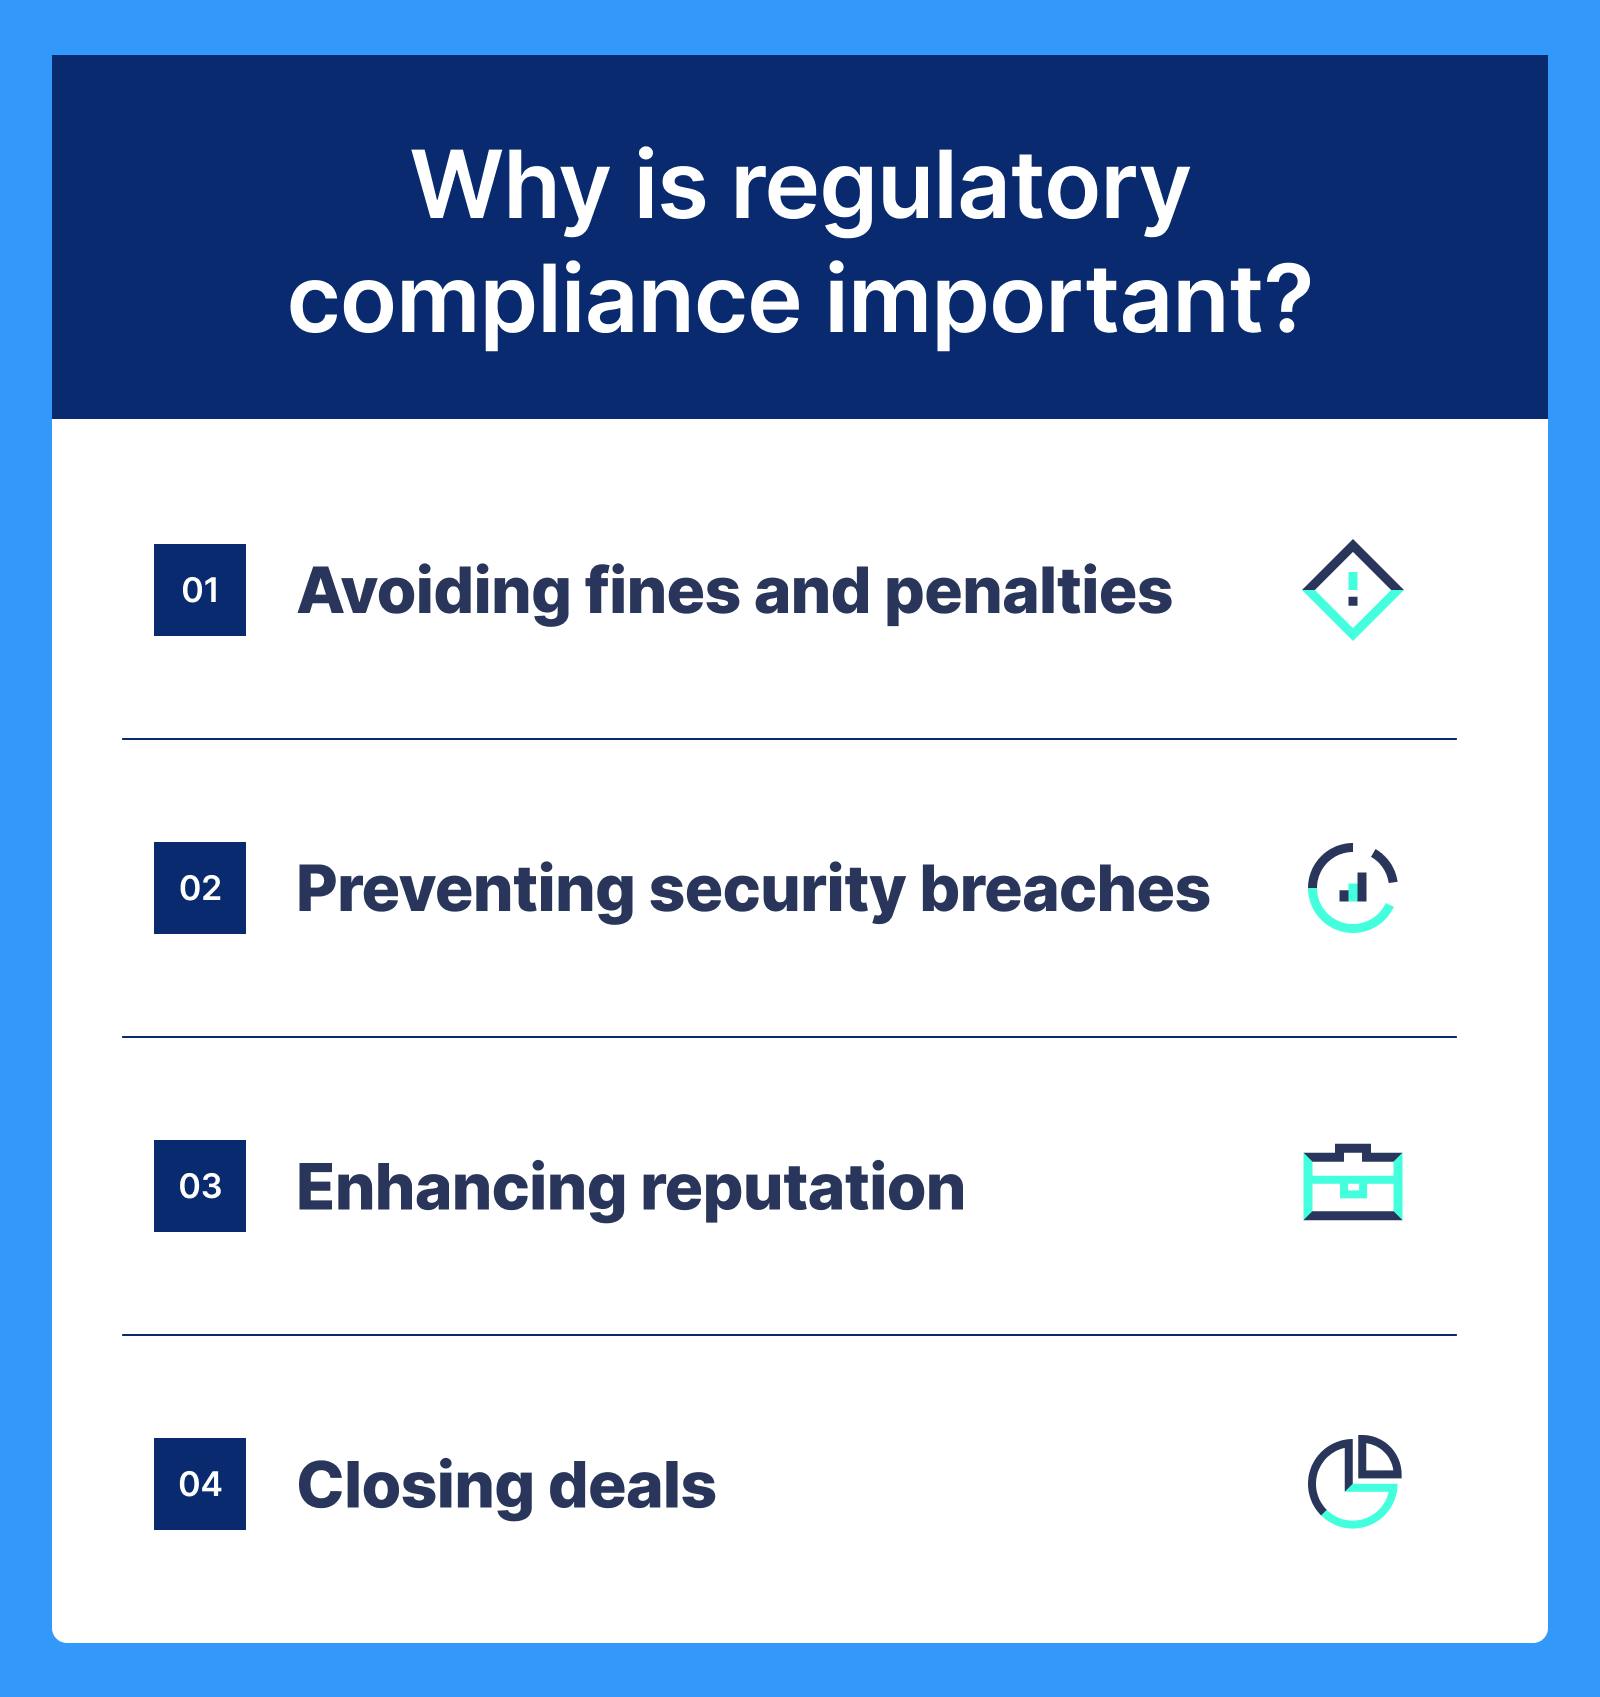 Four reasons regulatory compliance is important, including closing deals